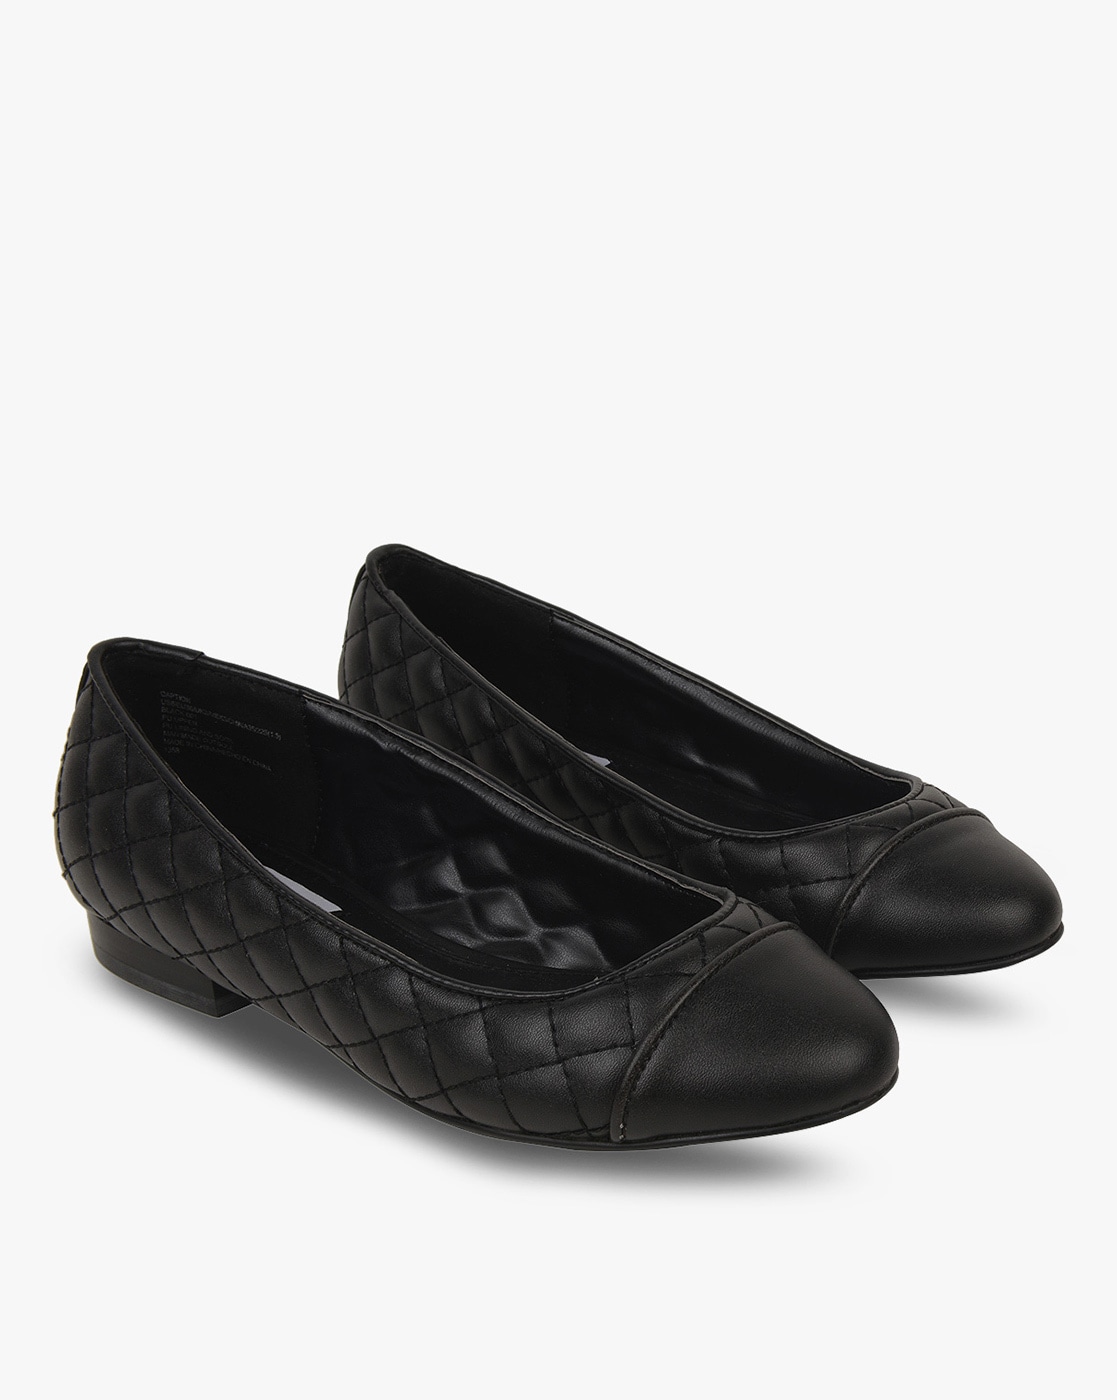 pasta Humanista danza Buy Black Flat Shoes for Women by STEVE MADDEN Online | Ajio.com